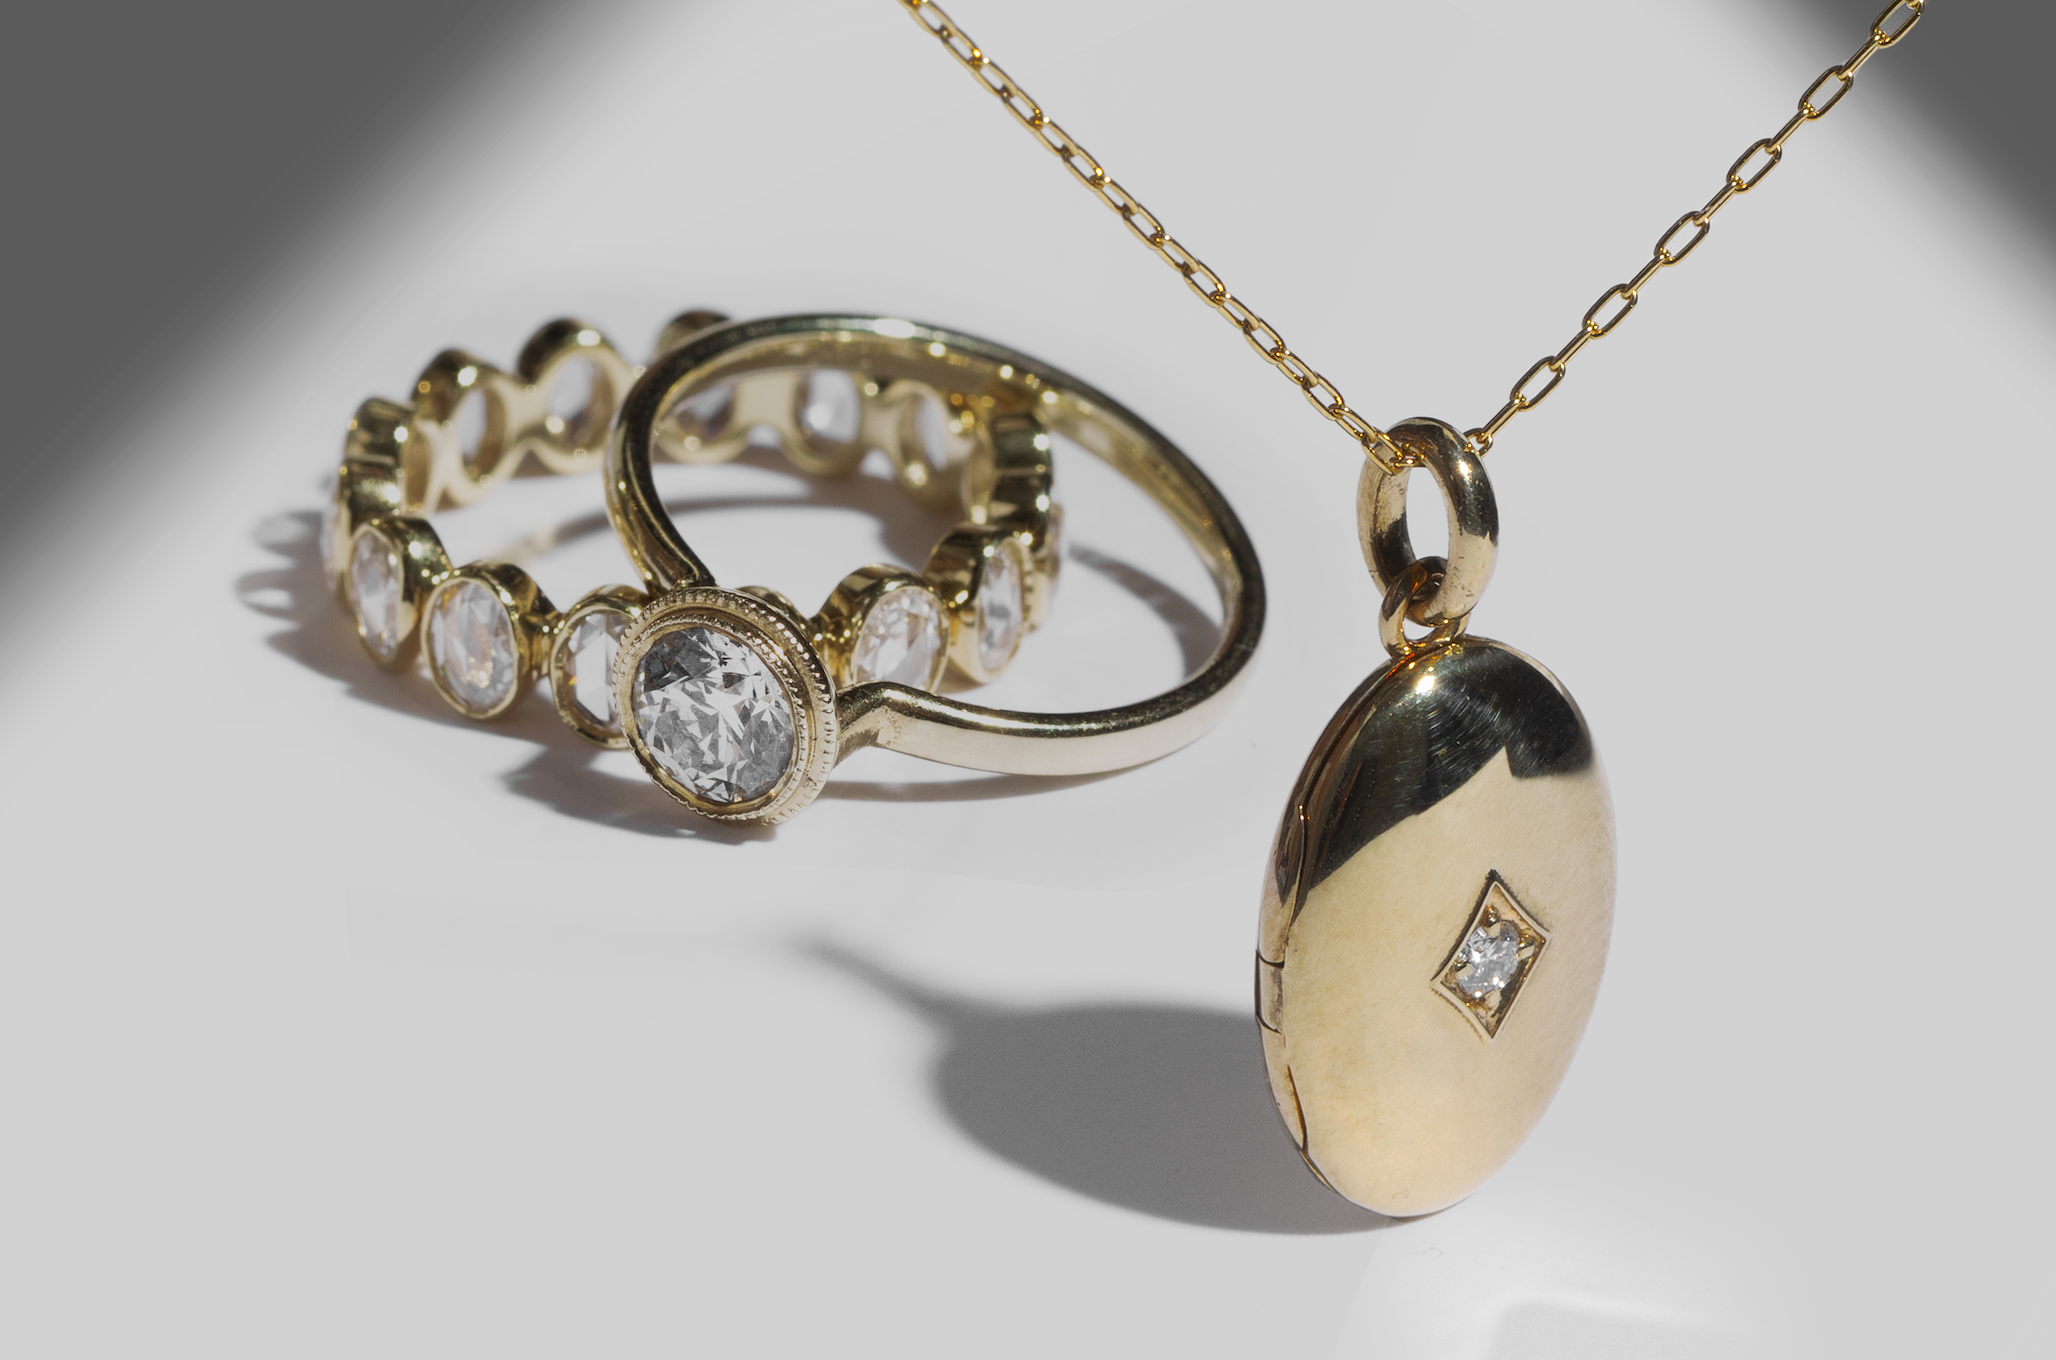 ILA SODHANI's Ellipse Band and Bezel Diamond Engagement Ring in yellow gold stacked behind the Tara Locket in yellow gold hanging in the foreground; shown on a white background with shadows in the upper corners.